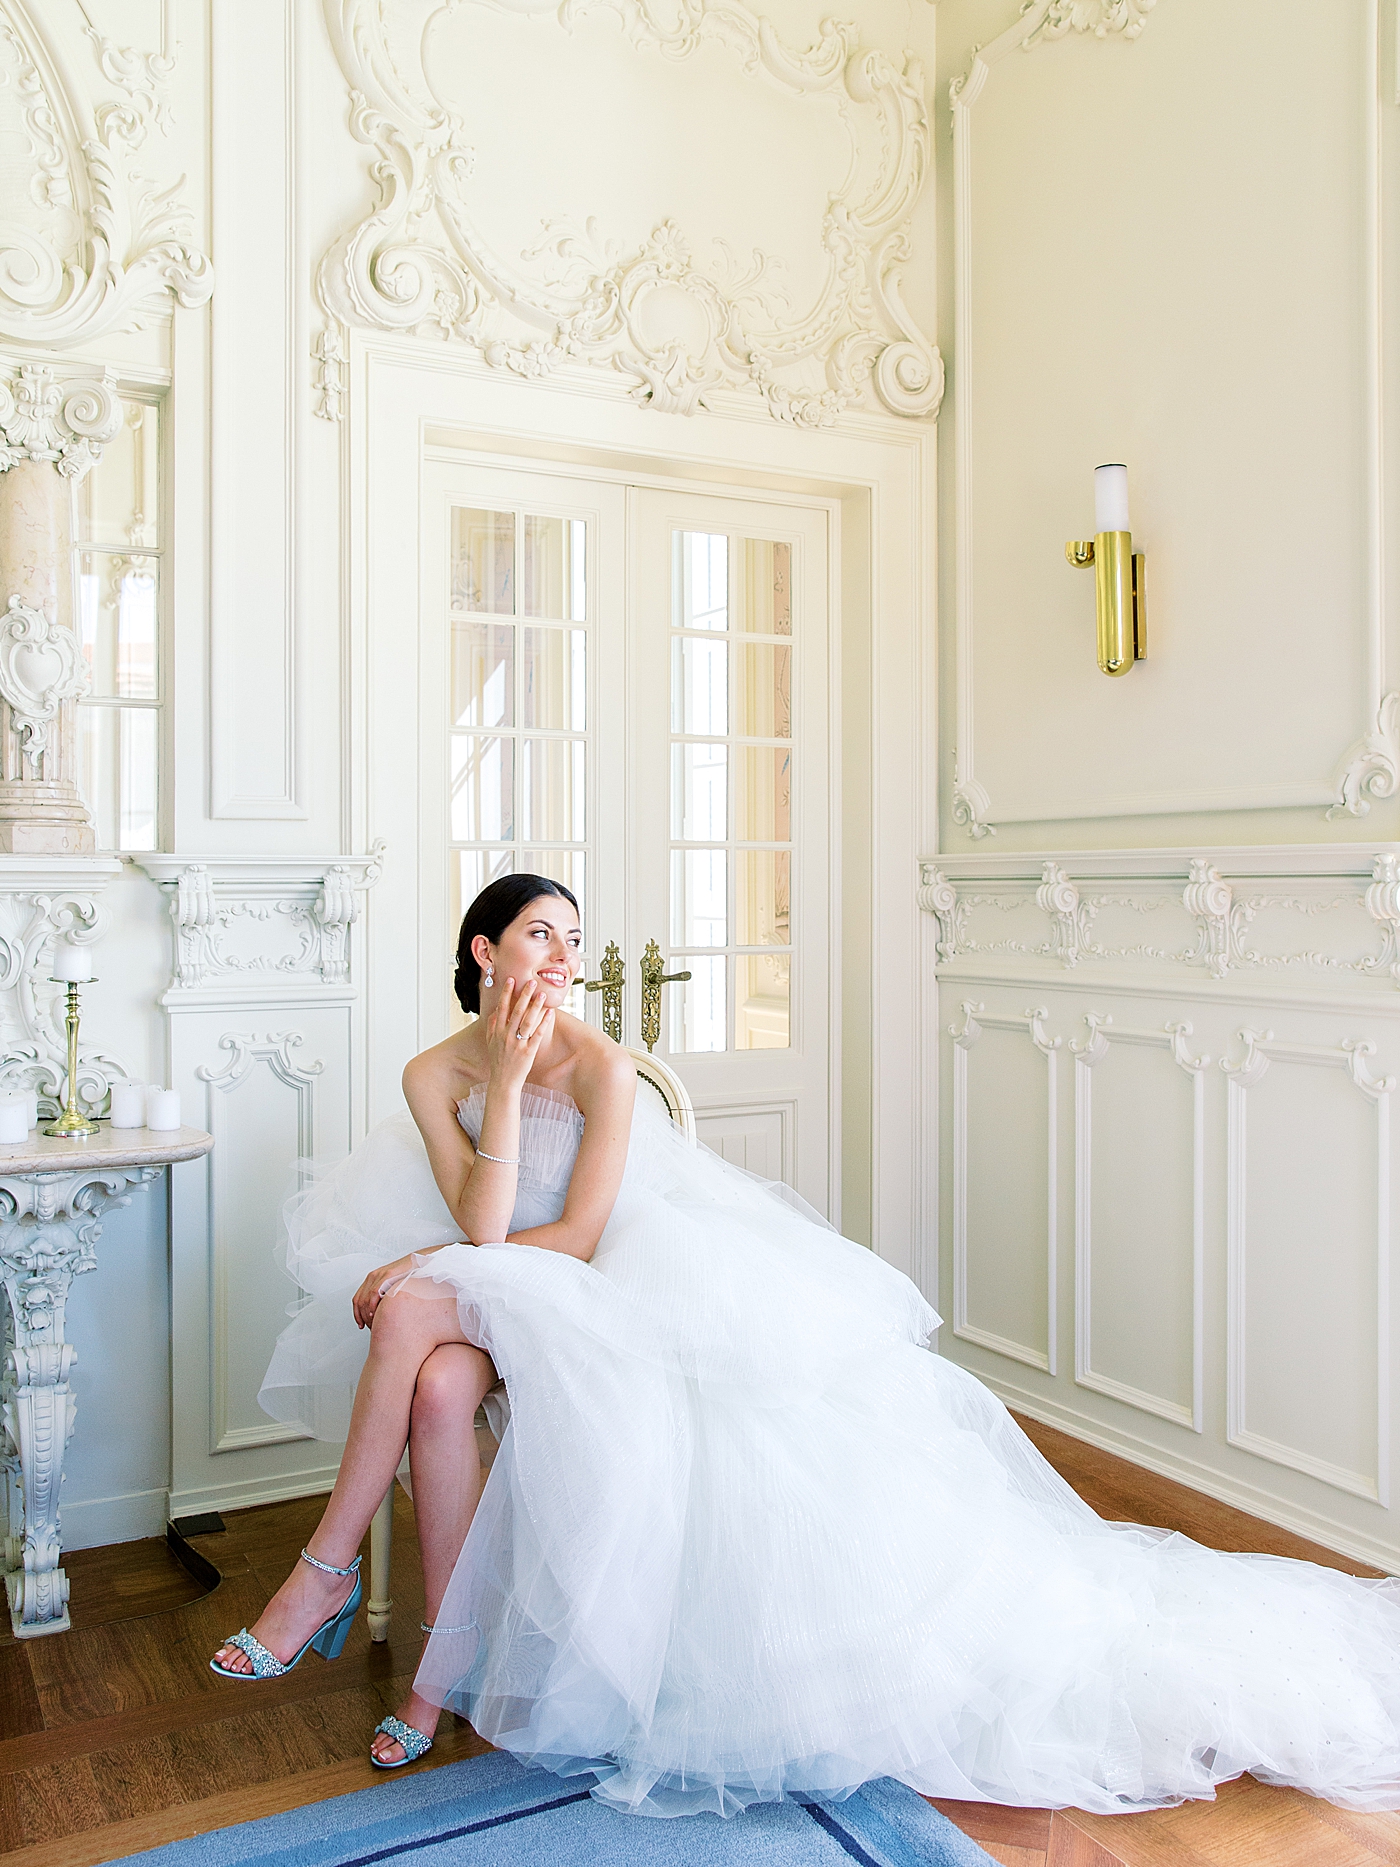 Bride with light blue shoes during bridal portraits in her getting ready room | Image by Diane Sotero 